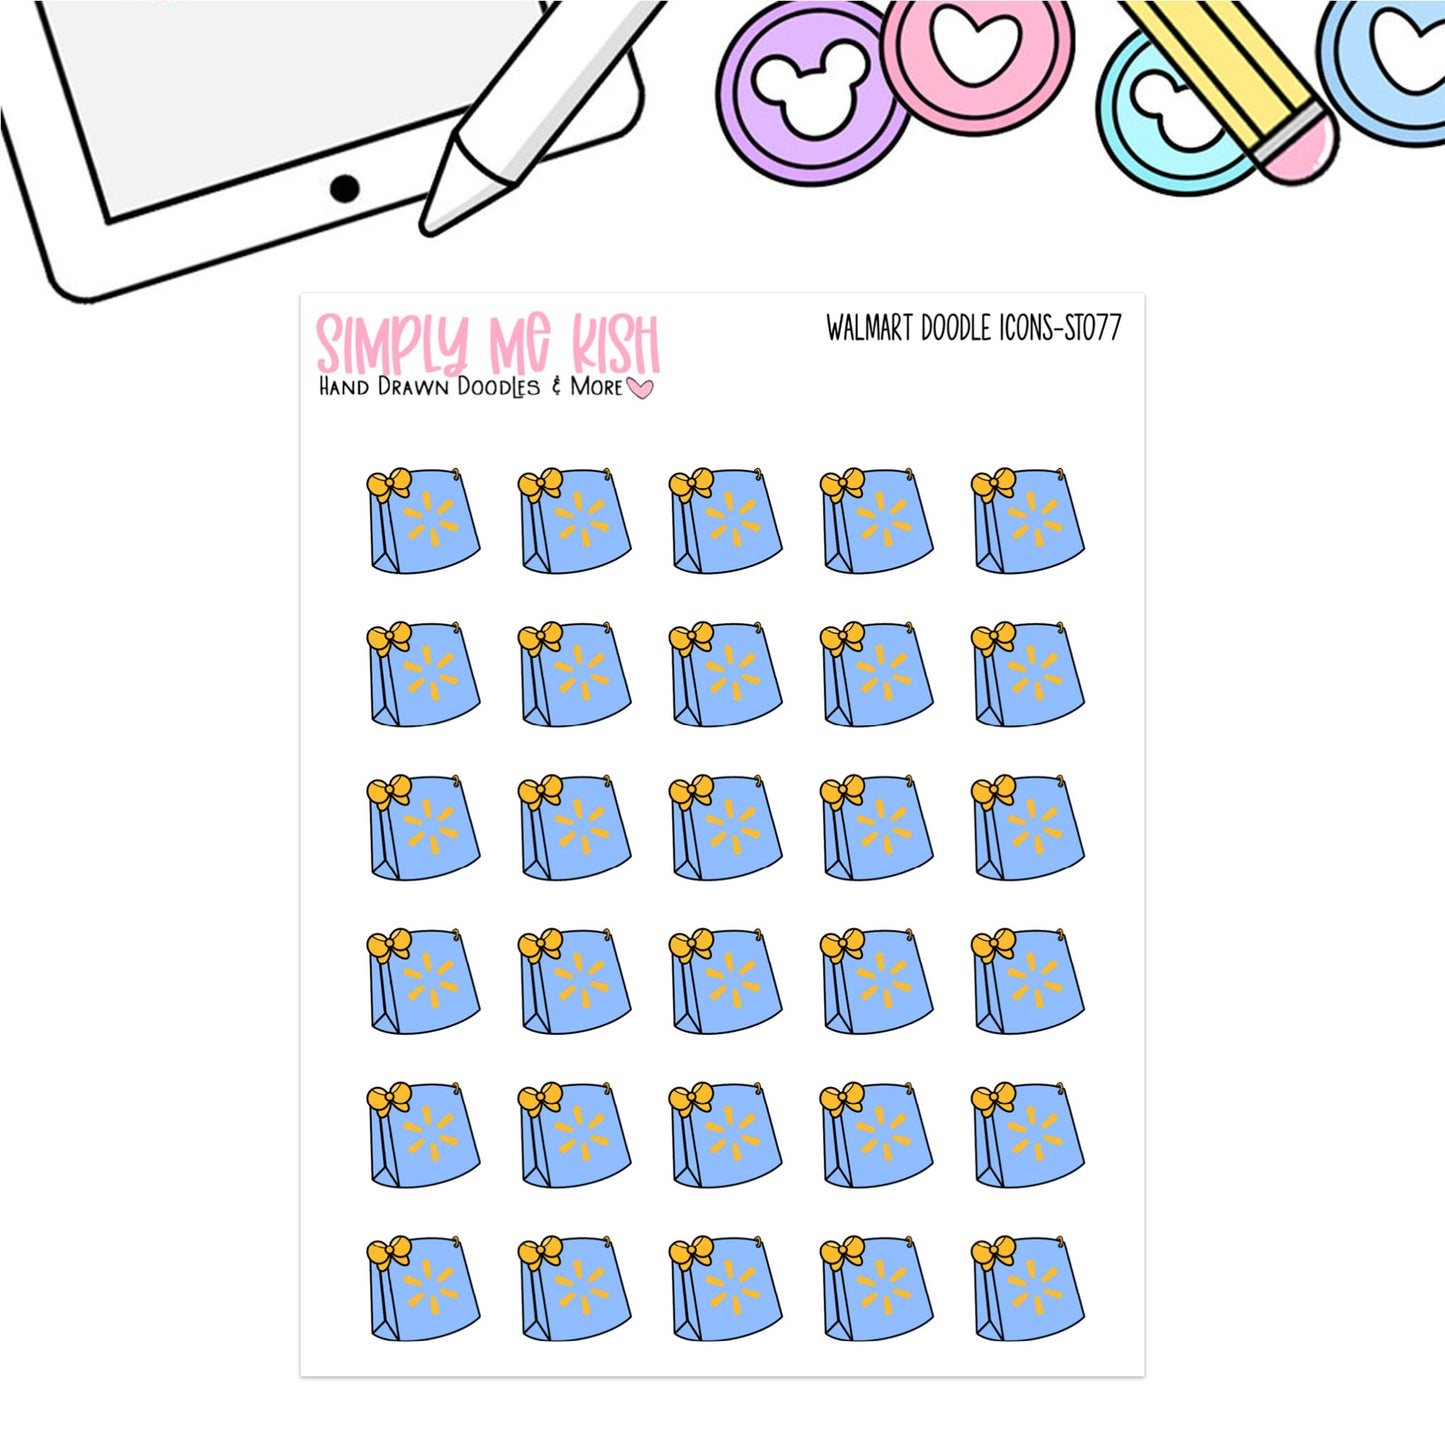 Wal-Mart |Shopping Bag | Doodle | Icon Stickers